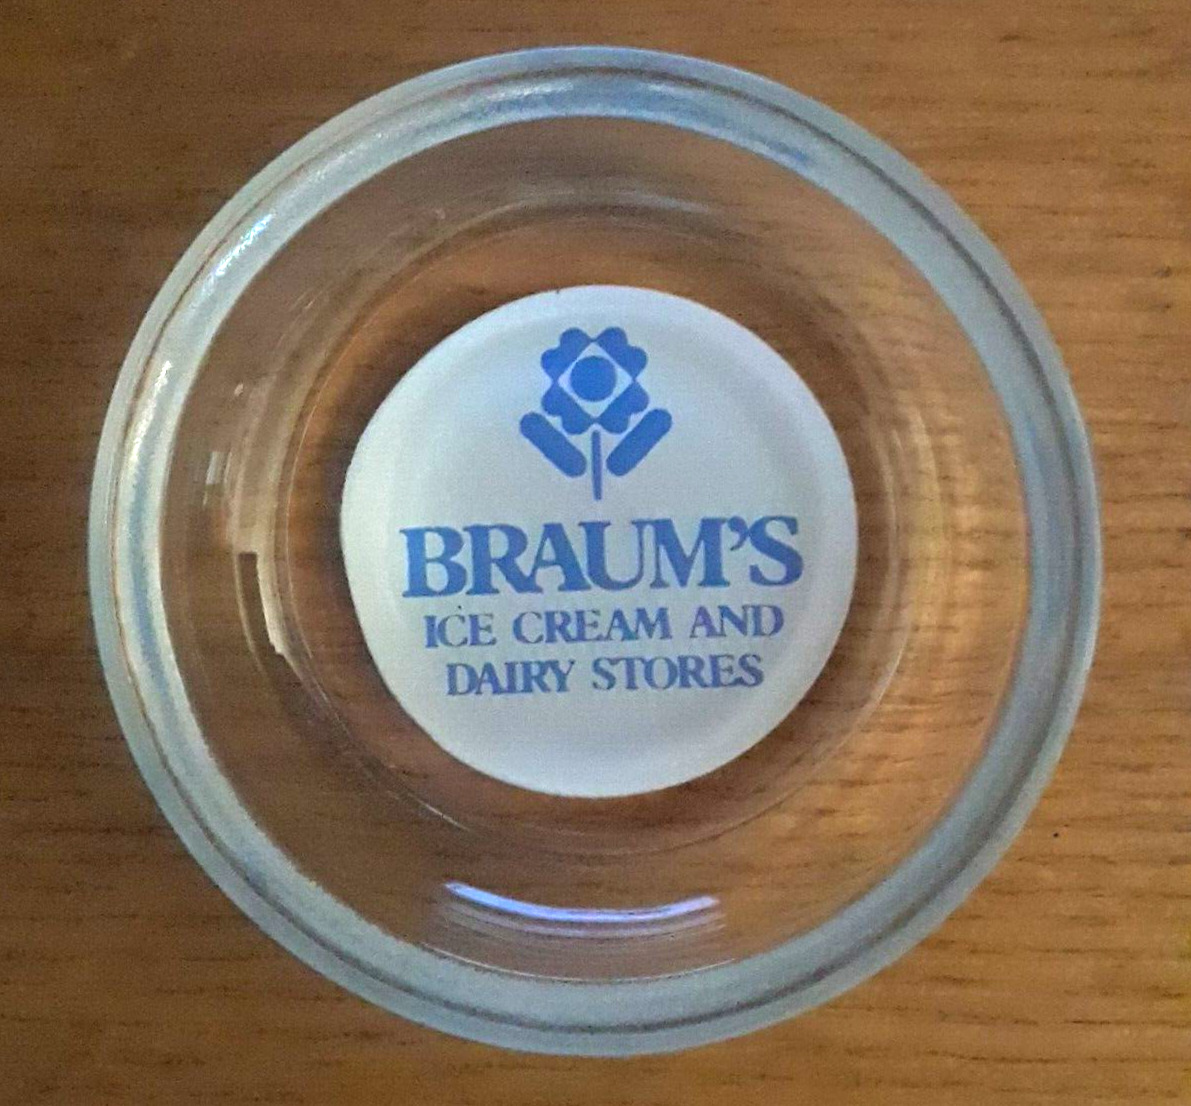 Vintage Braum’s ICE CREAM and DAIRY Stores GLASS Advertising Ashtray